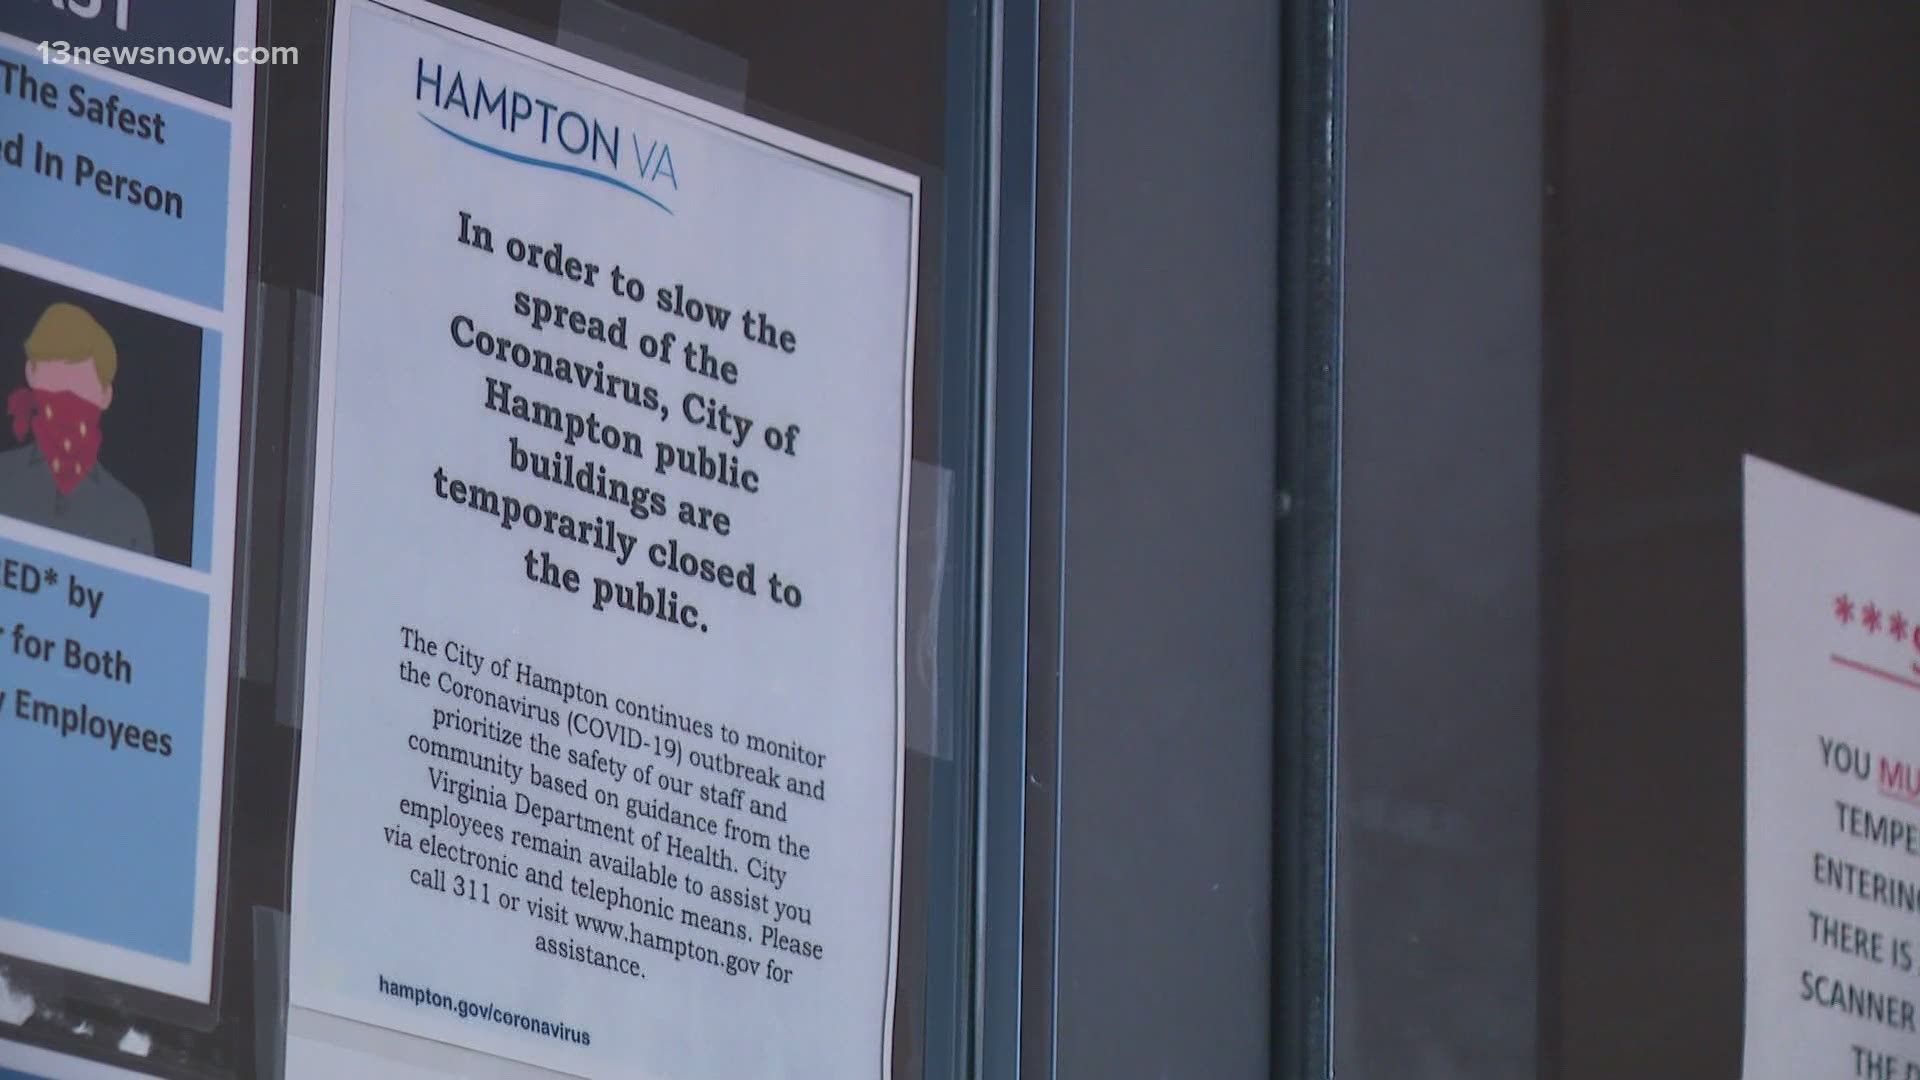 With a rise in COVID-19 cases around the peninsula, the city of Hampton is changing how in-person services work.